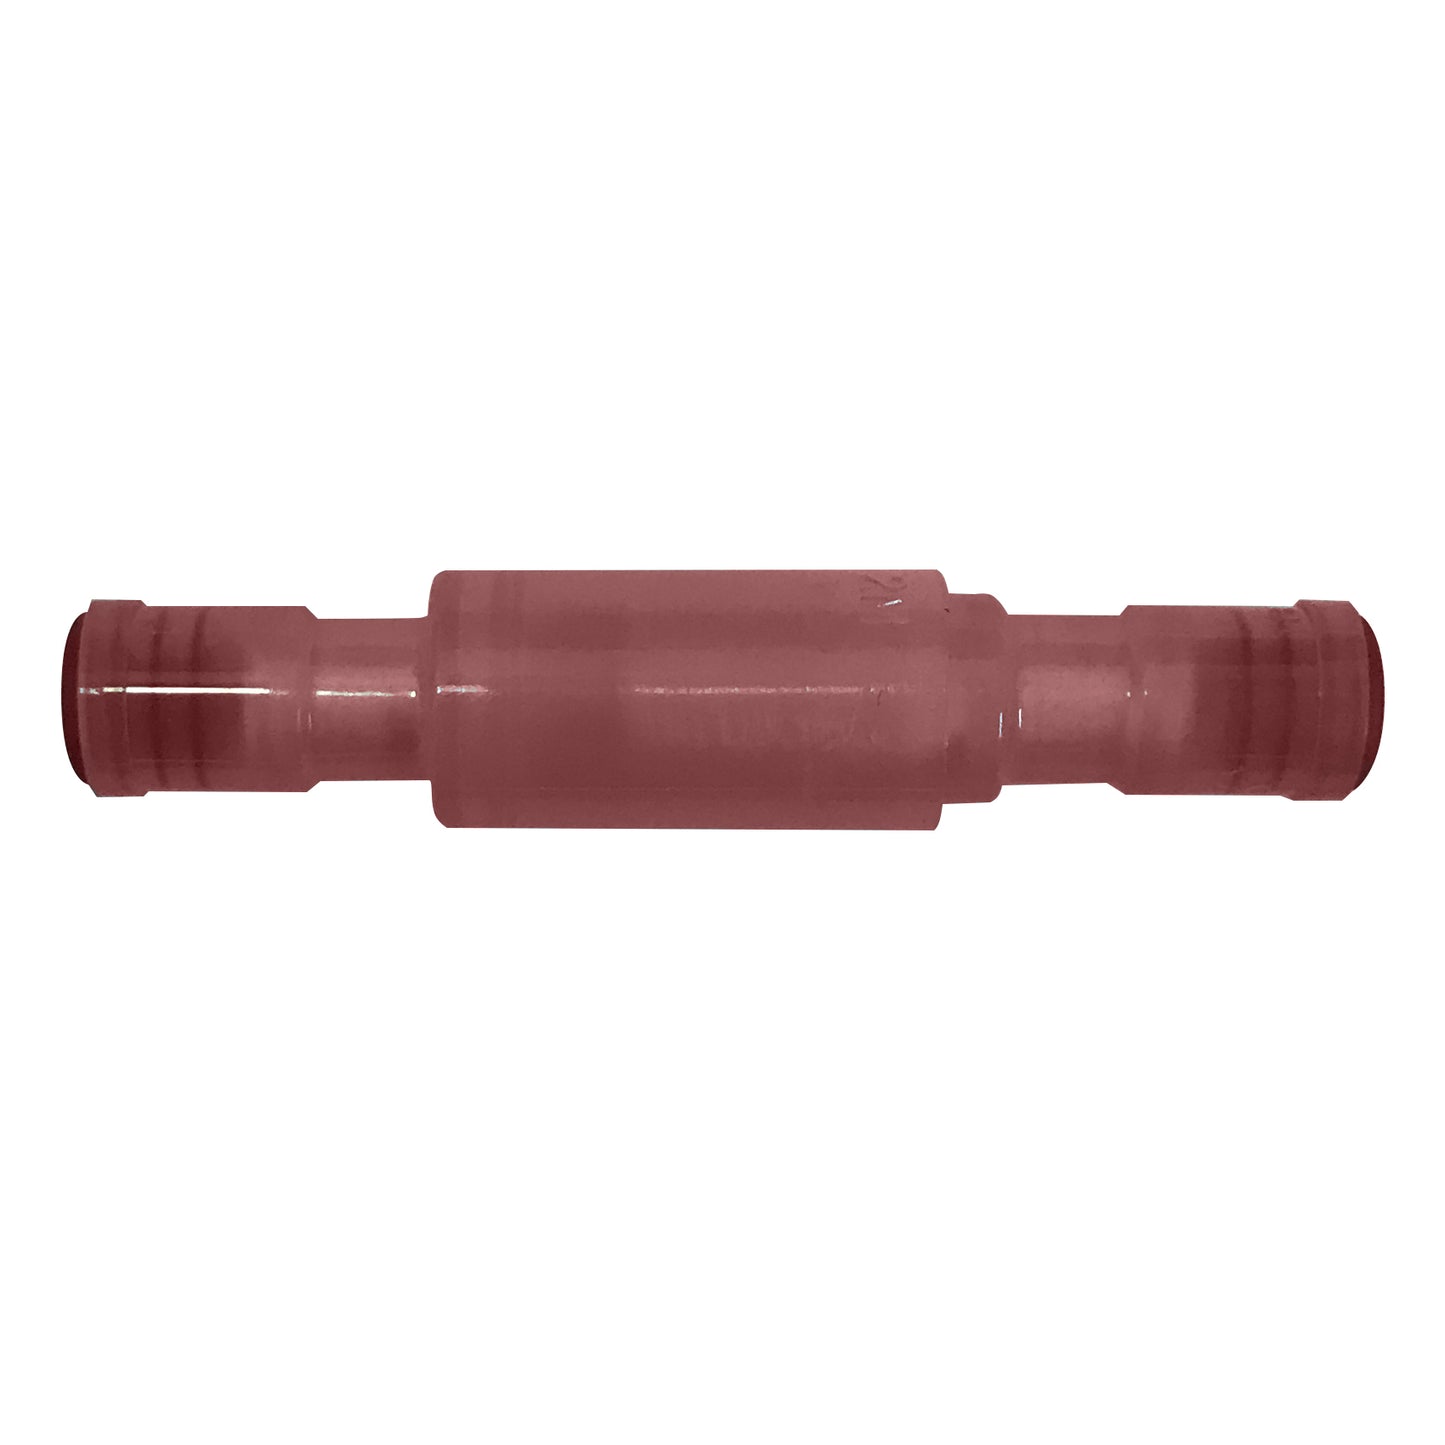 Waterproof Nylon Fully Insulated Red Female Connector 18-16 Gauge .157 Bullet - 100 Pack